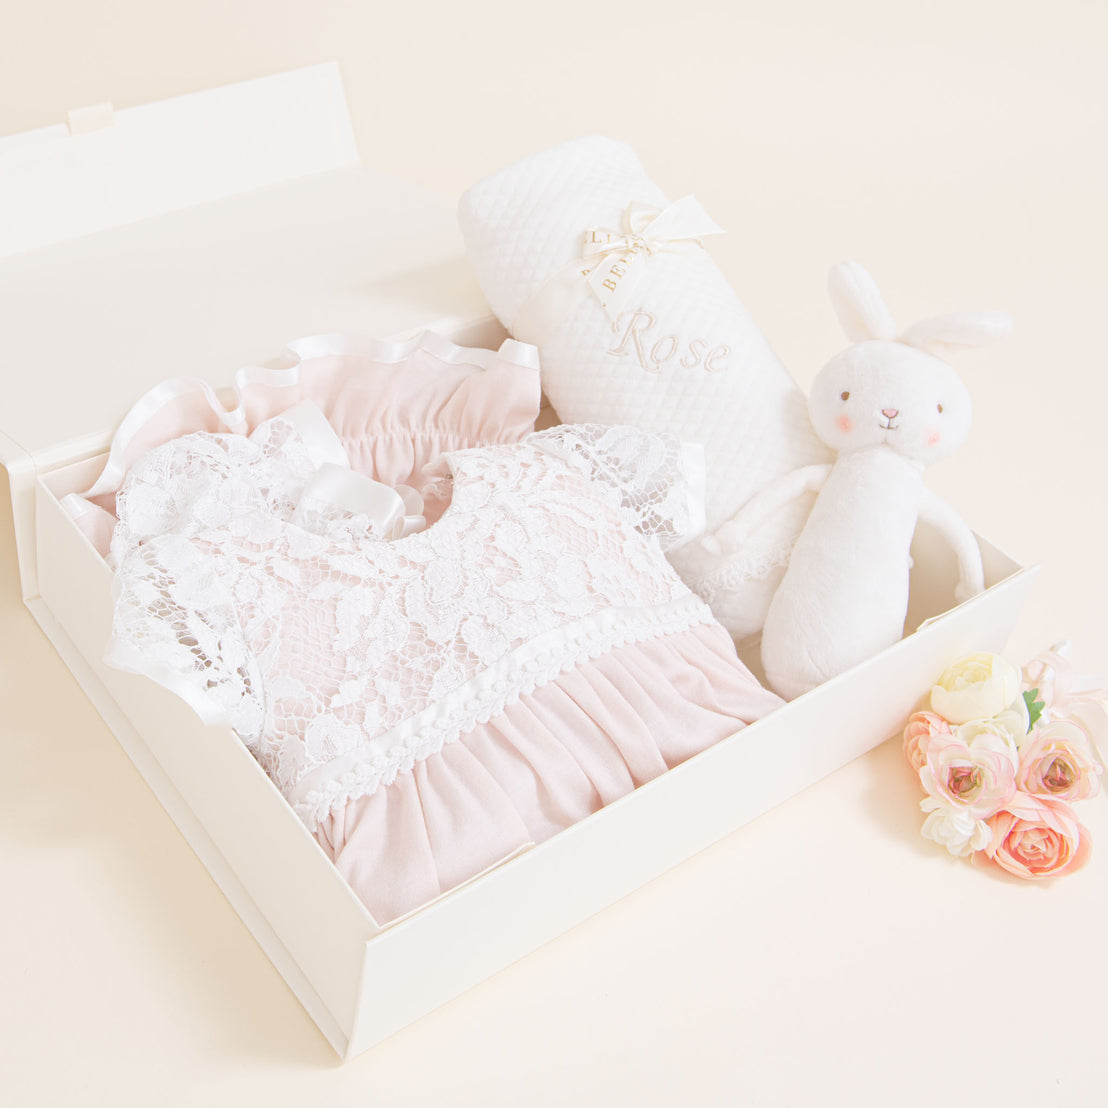 An elegant, traditional Rose Newborn Gift Set containing an heirloom lacy pink dress, a plush white bunny, and a decorative white personalized blanket with "rose" embroidered on it, displayed on a soft peach background